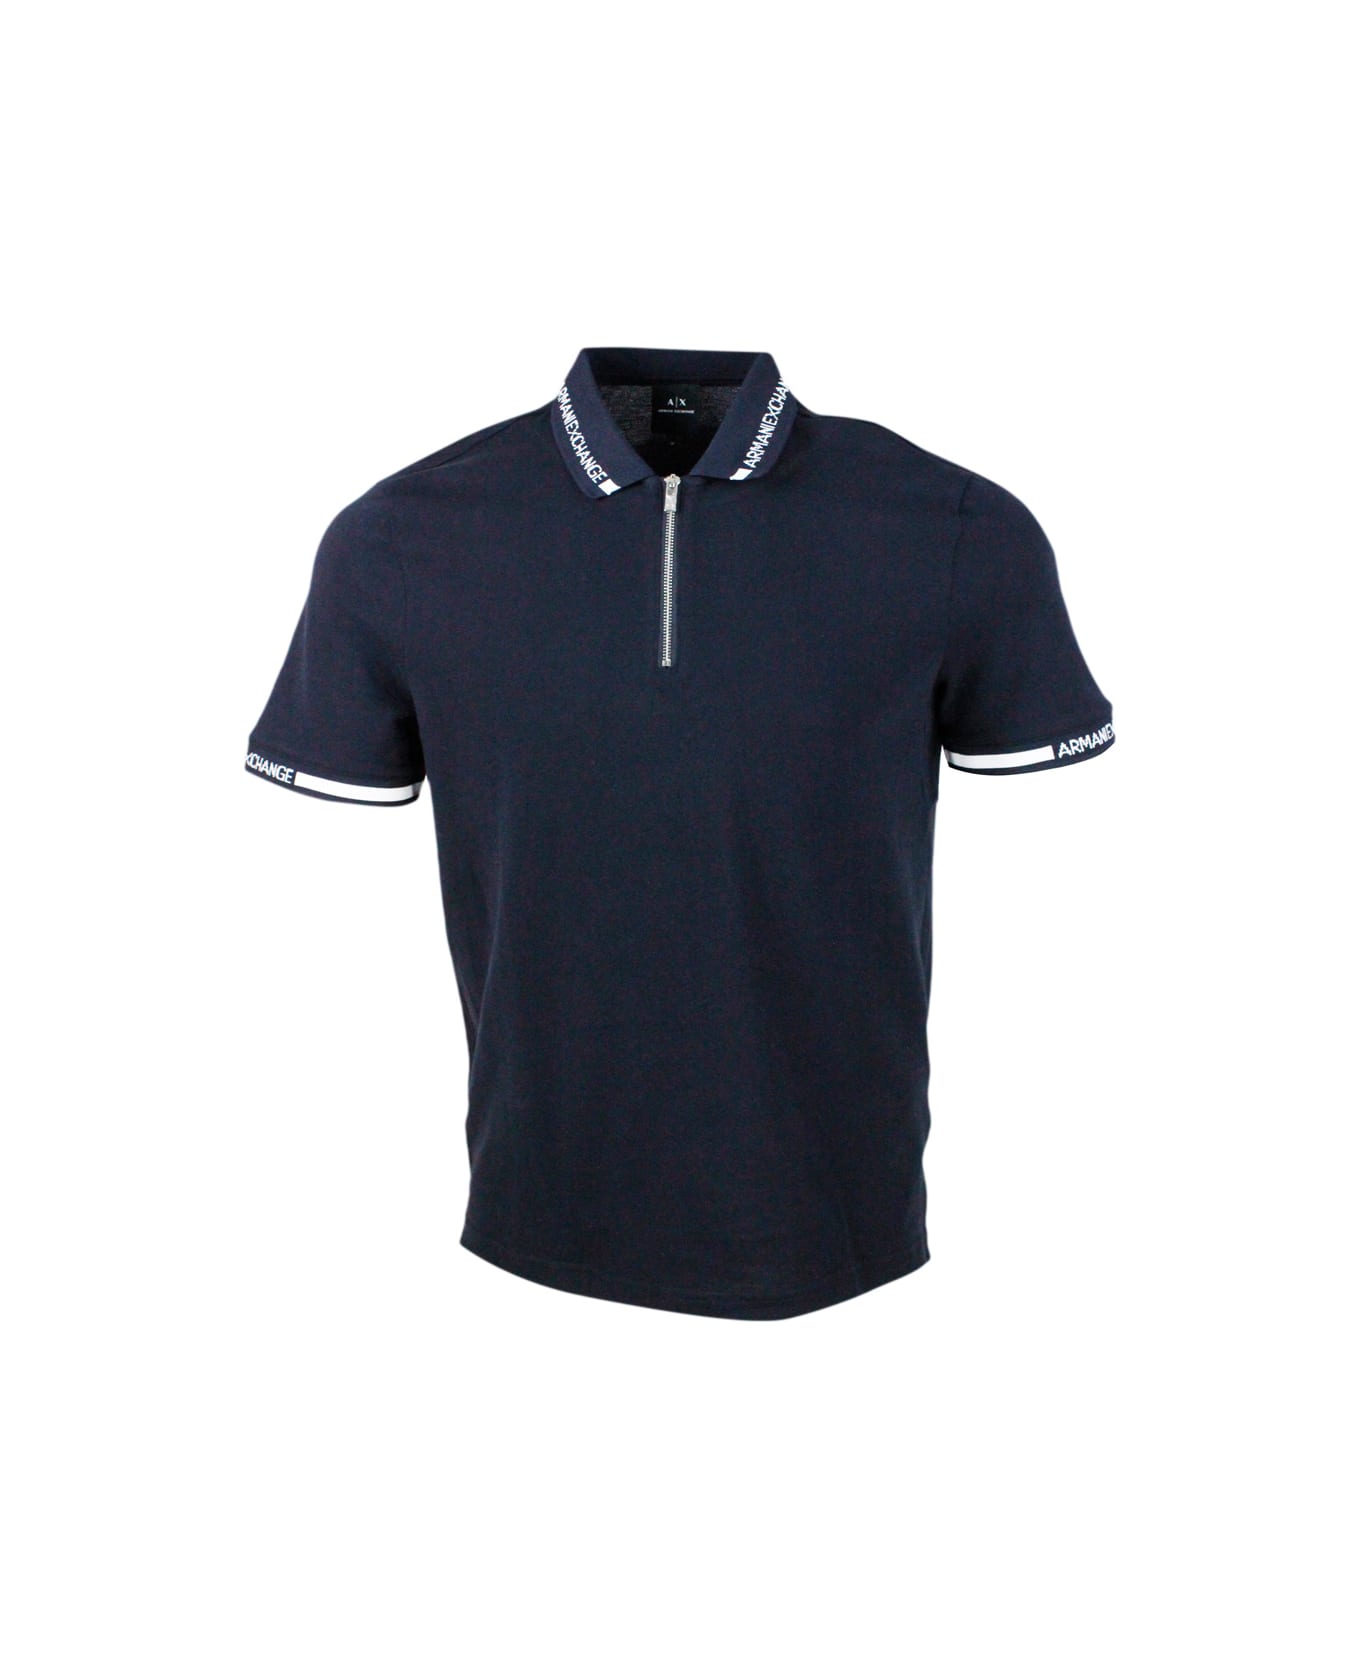 Armani Collezioni Hort-sleeved Pique Cotton Polo Shirt With Zip Closure And Writing On The Collar - Blu